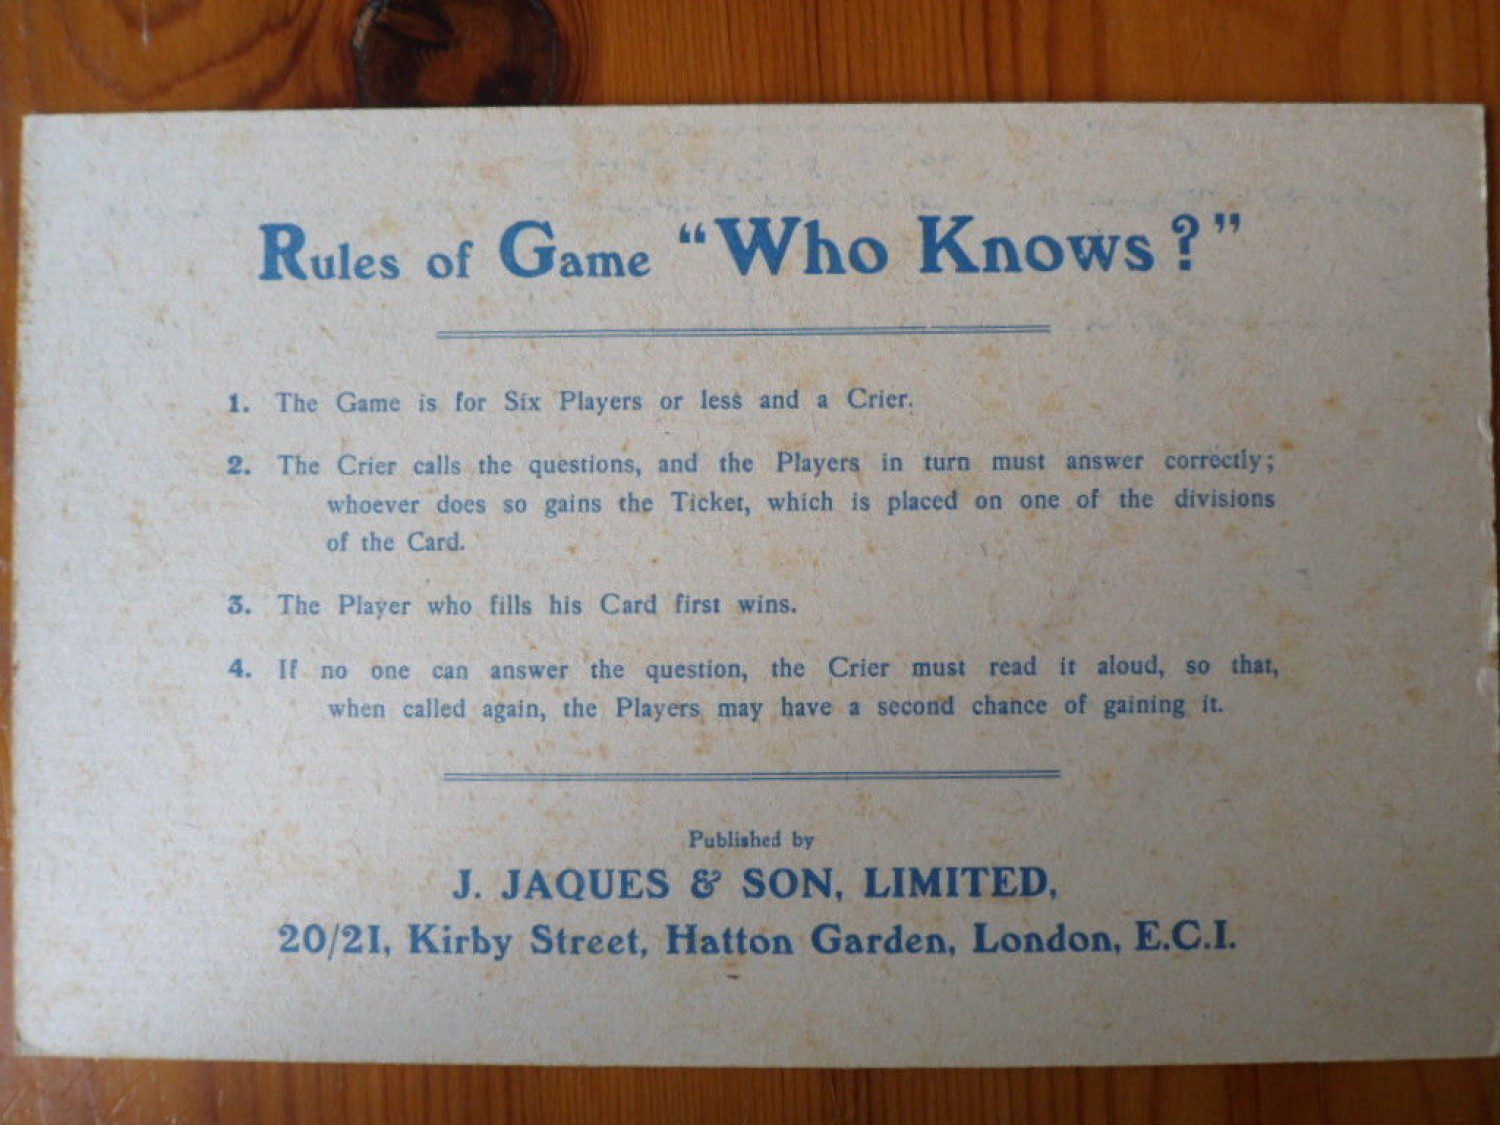 'Who Knows?' rules